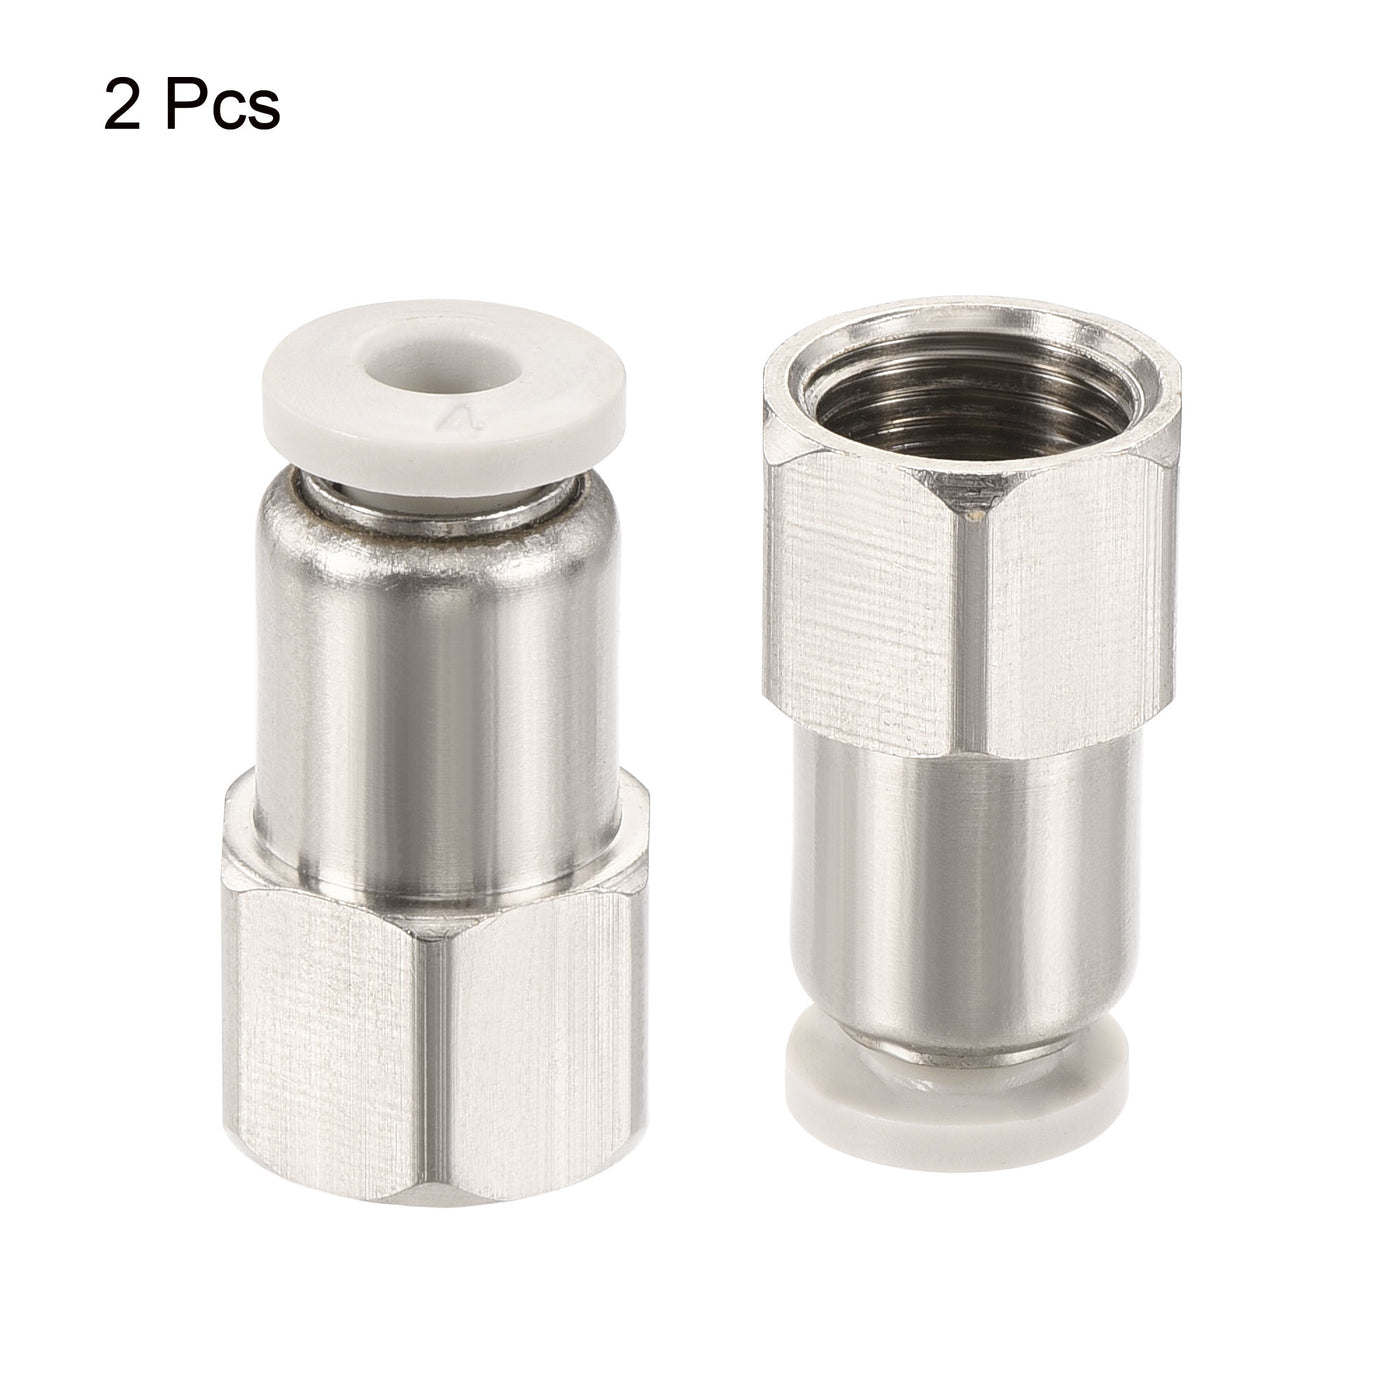 Harfington Push to Connect Fittings 1/8PT Female Thread Fit 4mm Tube OD Nickel-plated Copper Straight Union Fitting, Pack of 2